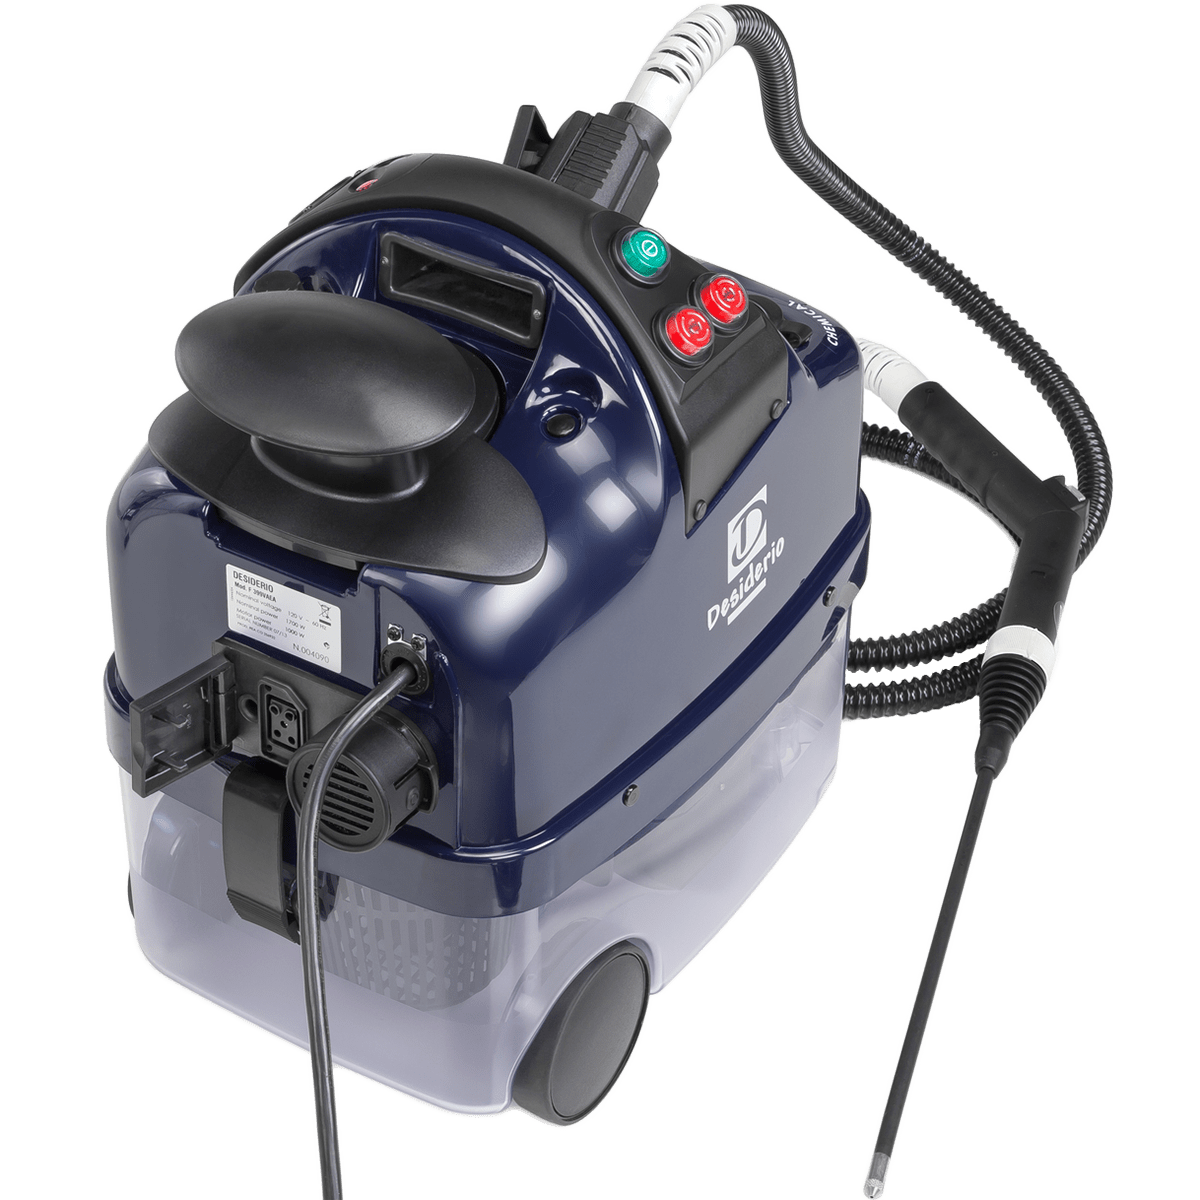 How to Use a Carpet Steam Cleaner - My Vapor Clean